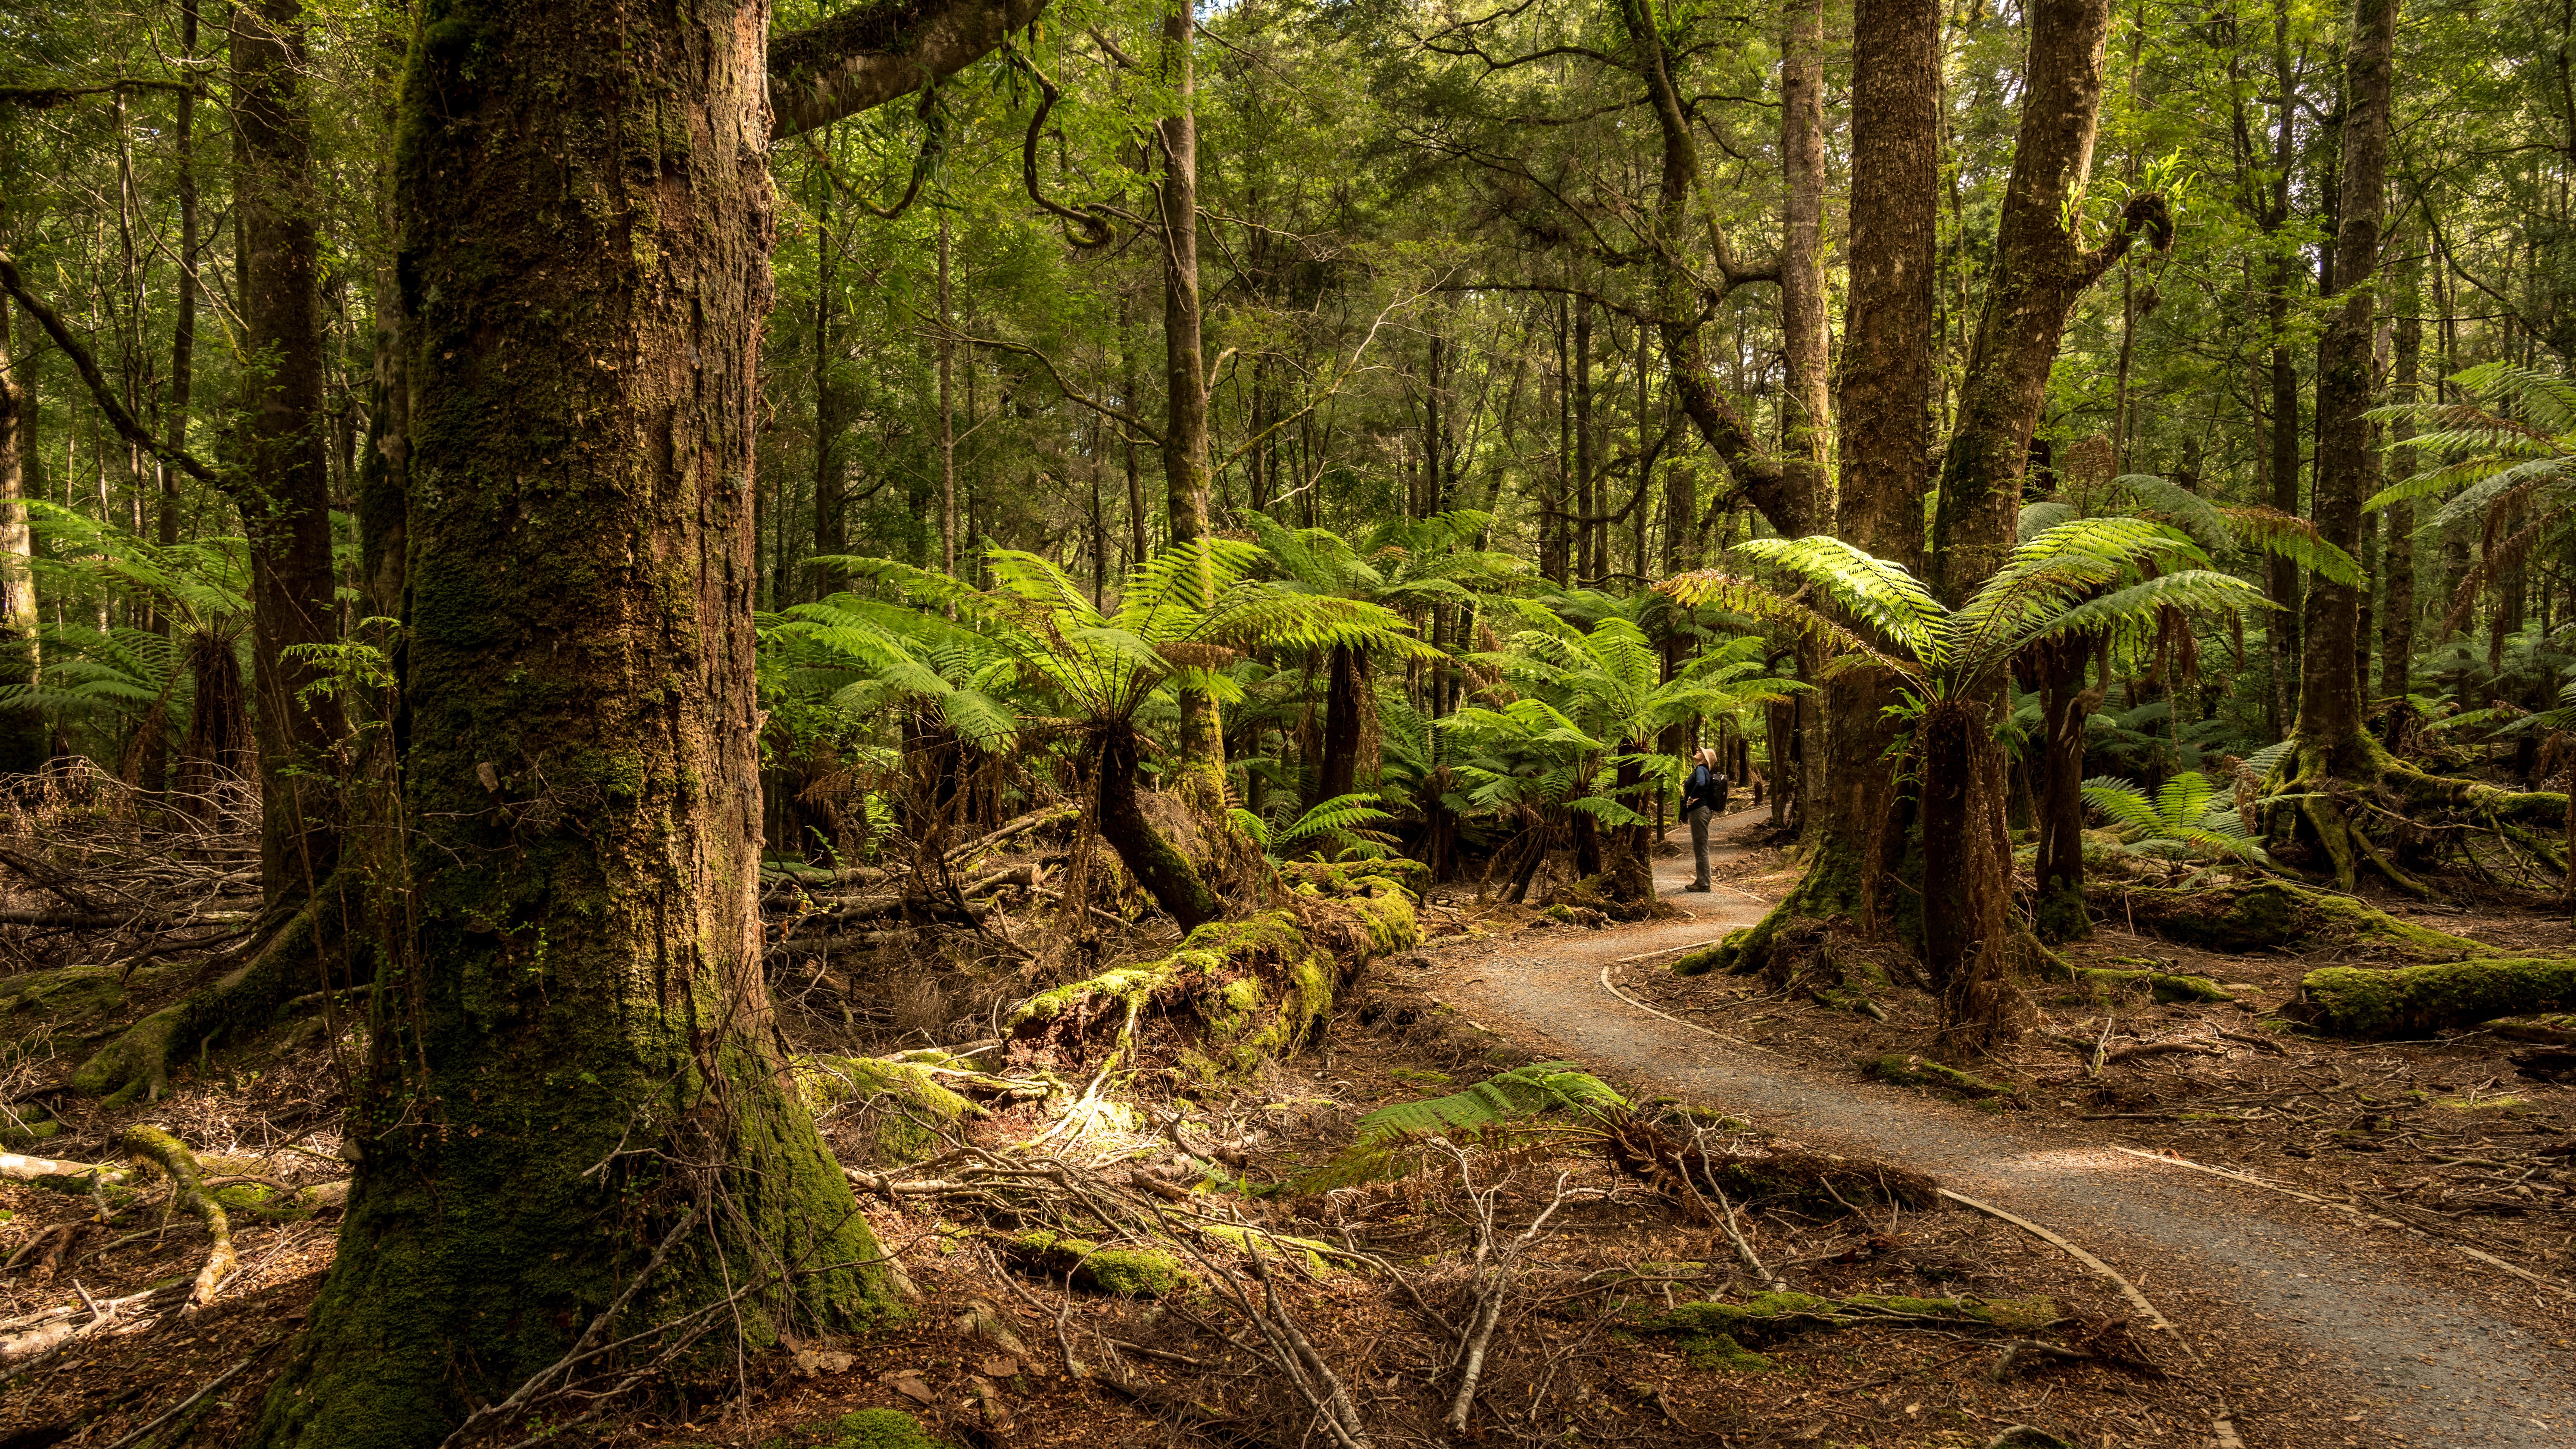 A view inside a forest in Tasmania, with large trees and ferns growing